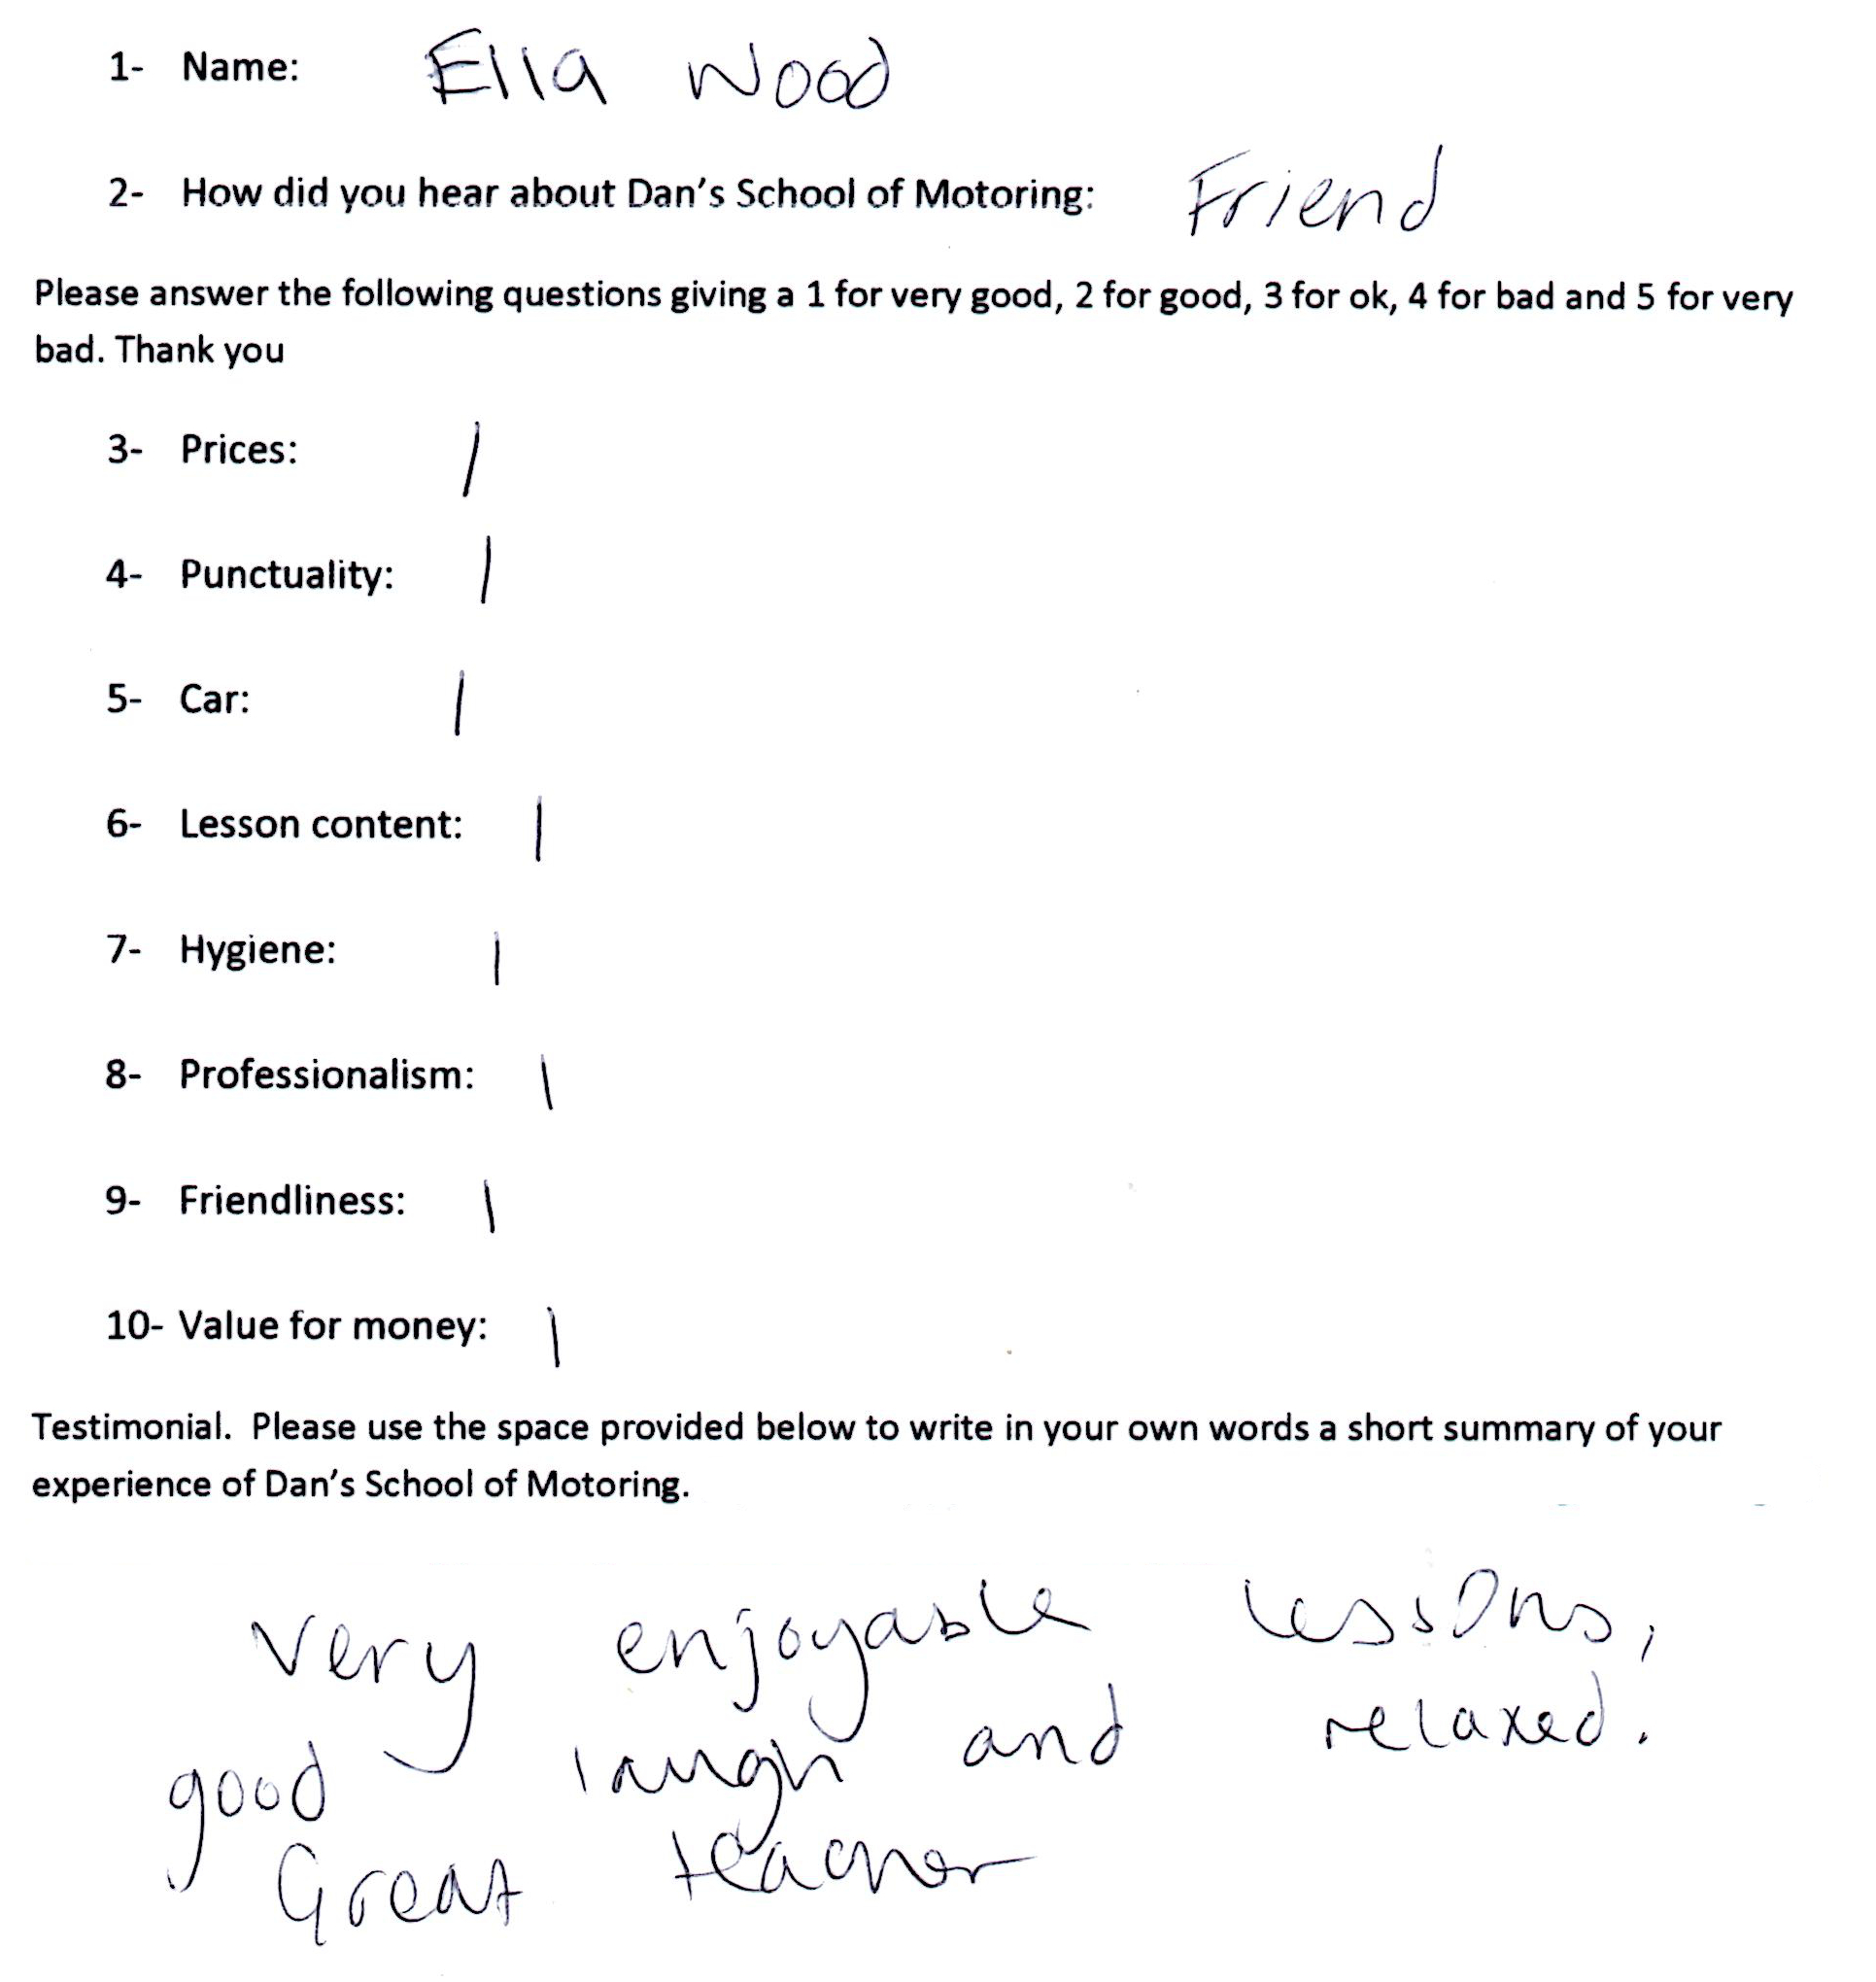 Ella's Review: Very enjoyable lessons, good laugh and relaxed. Great teacher